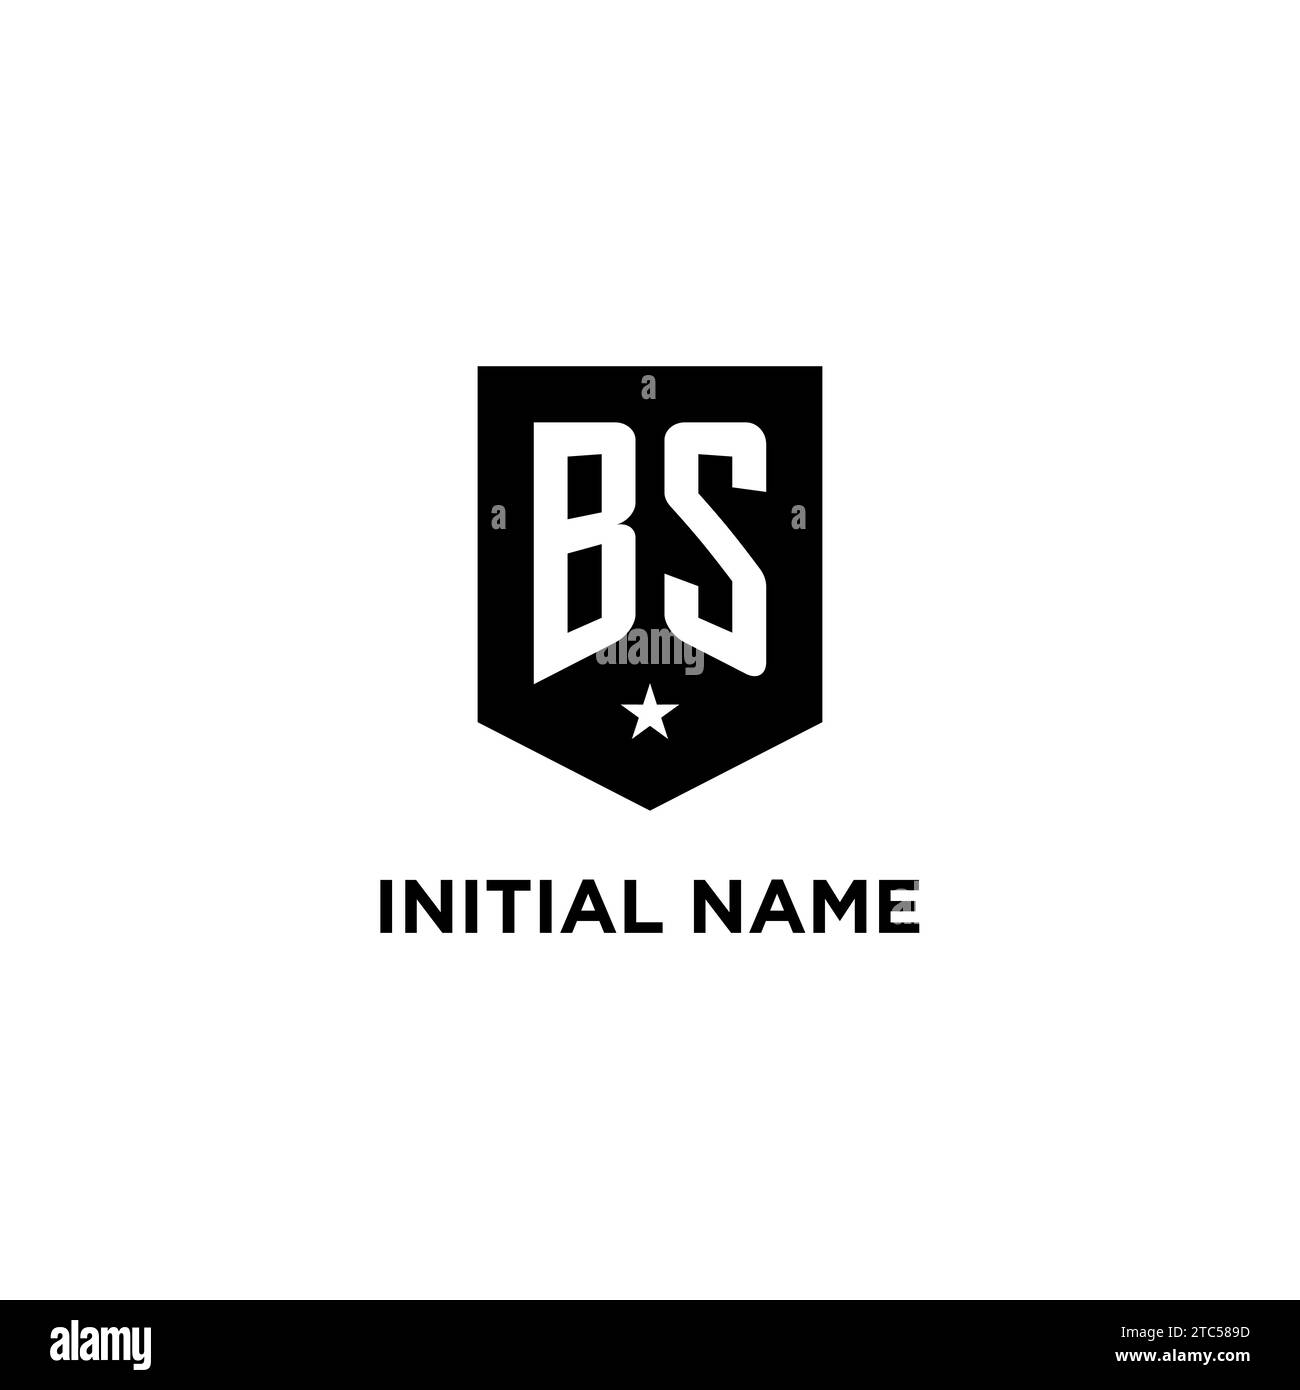 BS monogram initial logo with geometric shield and star icon design style ideas Stock Vector